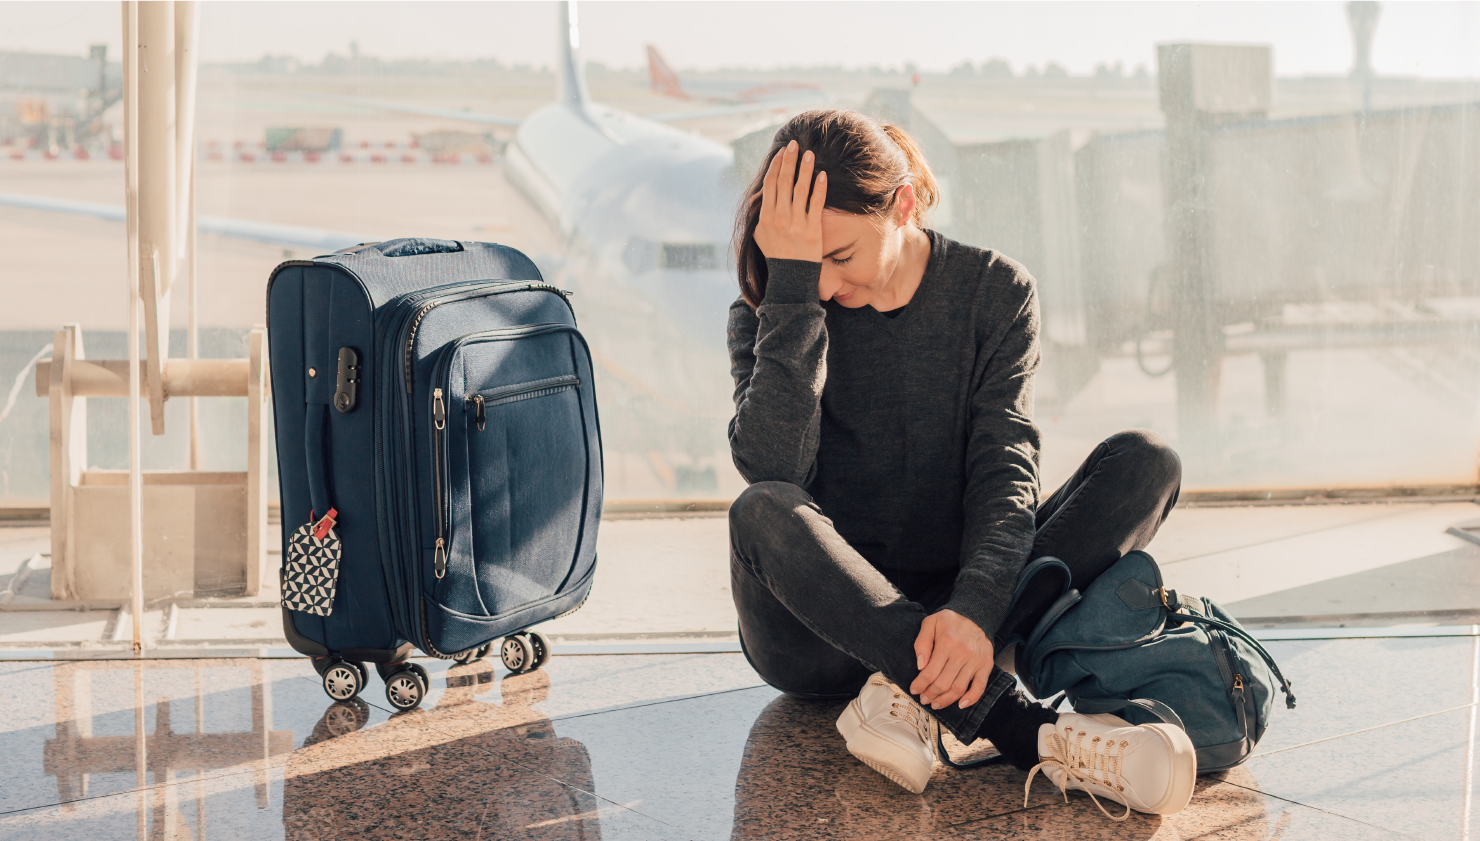 Woman in airport sitting next to suitcase seemingly in pain from jet lag